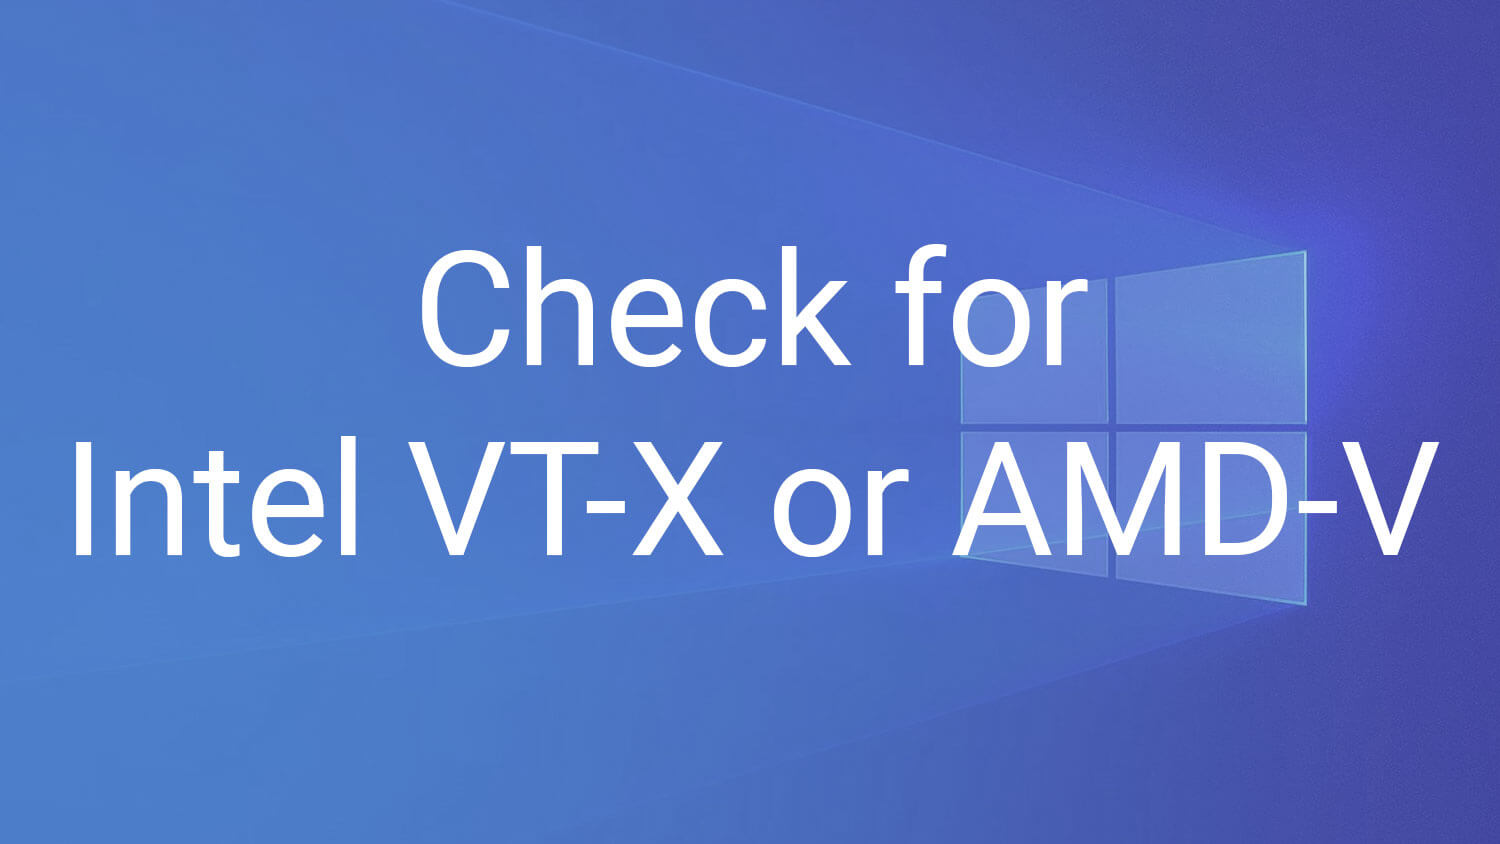 intel s vt-x and amd s amd-v are examples o